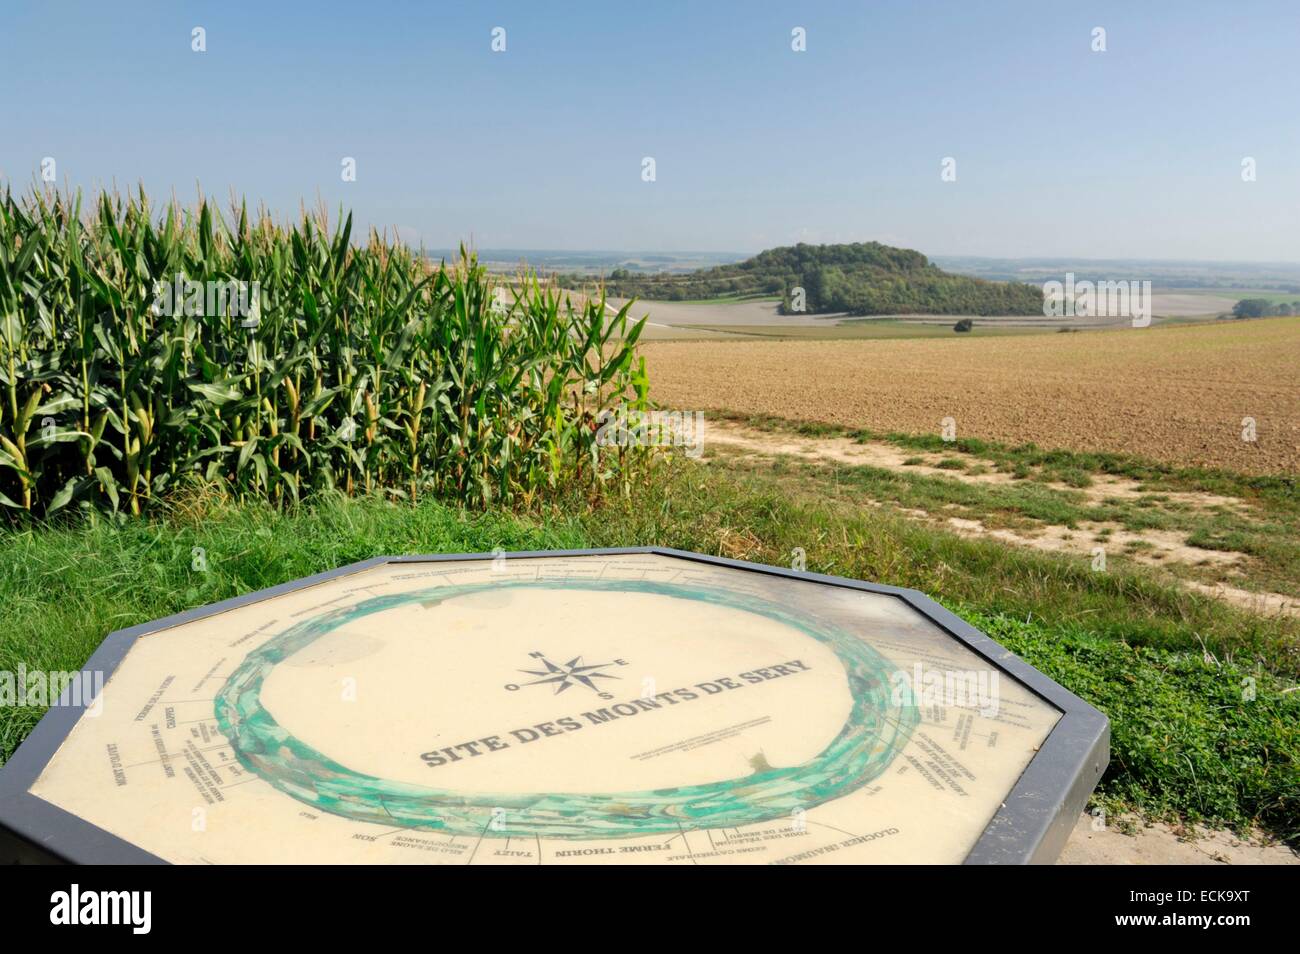 France, Ardennes, Sery, natural site Monts de Sery, views of Mount Roman Camp from the orientation table Stock Photo